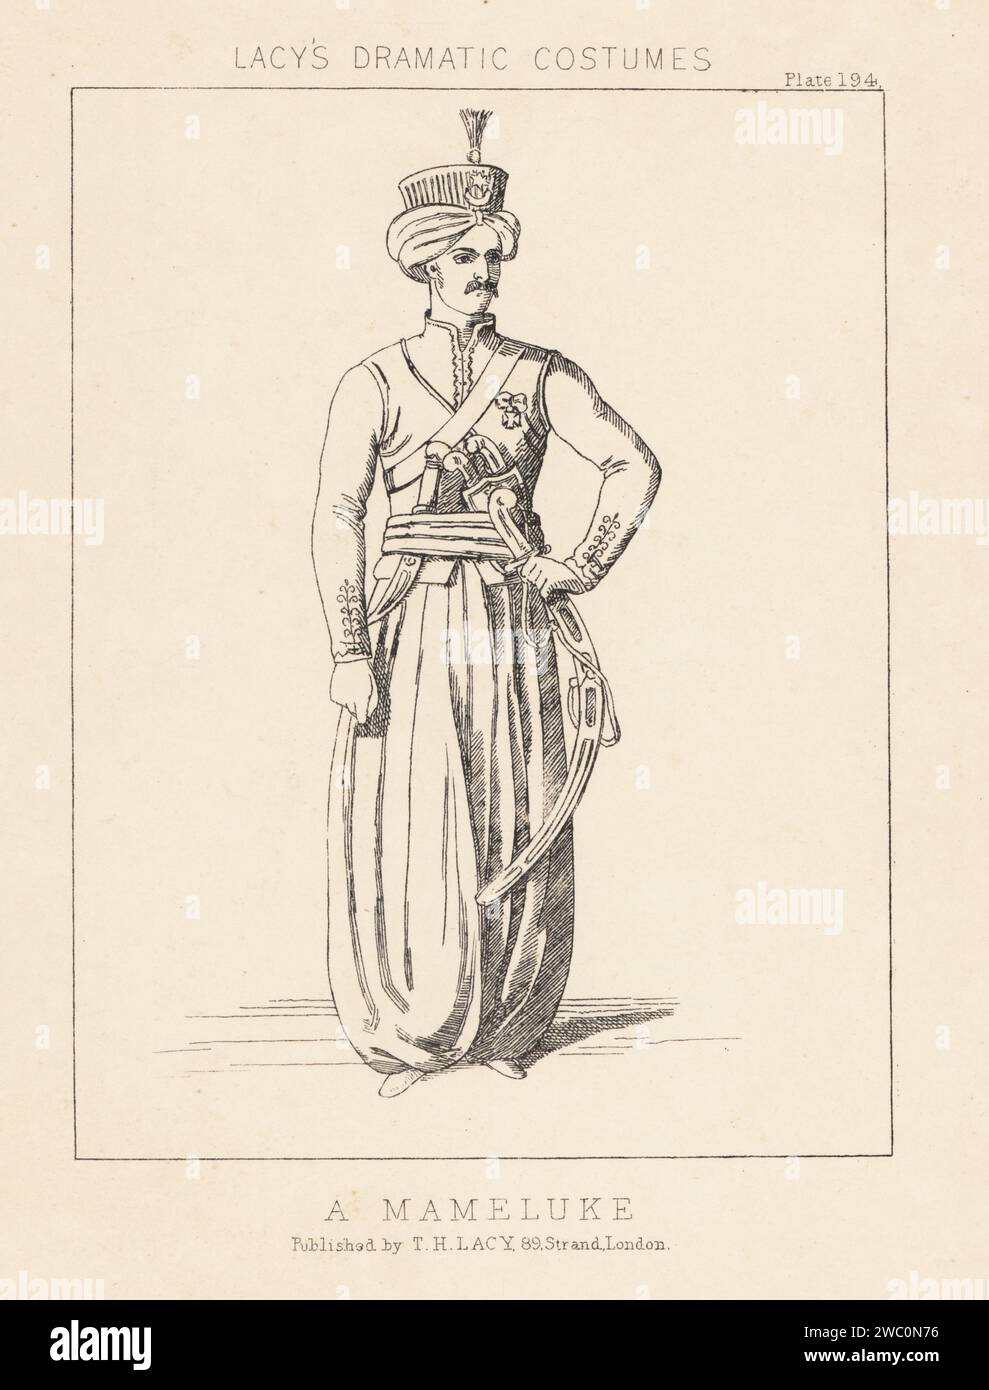 Costume of a mamluk mercenary, Ottoman Empire, 18th century. In turban, tunic, harem pants, armed with a scimitar and daggers. Mameluke. Lithograph from Thomas Hailes Lacy's Male Costumes, Historical, National and Dramatic in 200 Plates, London, 1865. Lacy (1809-1873) was a British actor, playwright, theatrical manager and publisher. Stock Photo